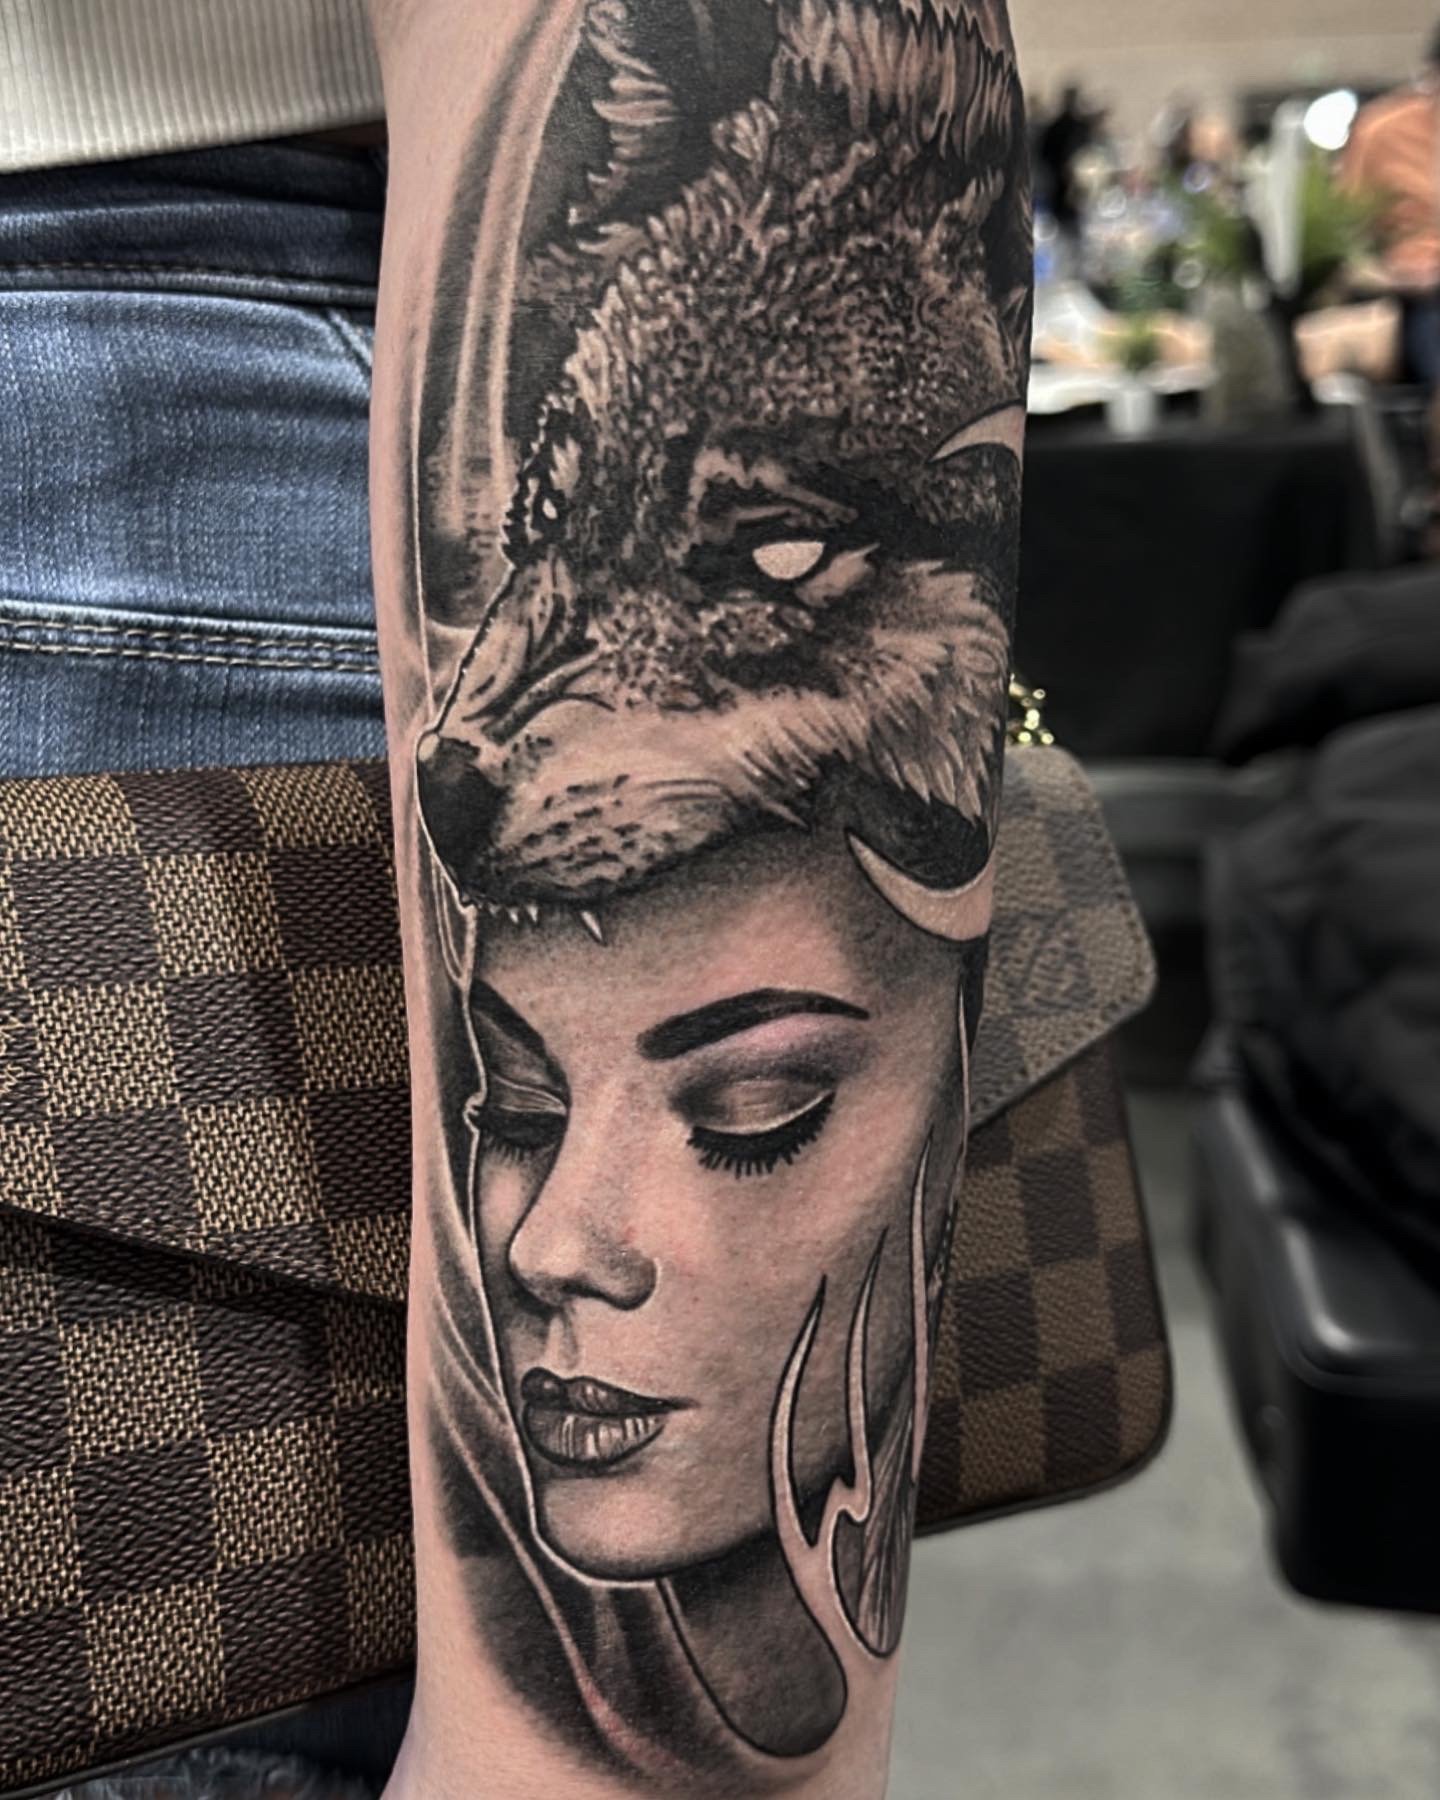 Your Guide to Best Tattoo Shops in Oslo | Culture Trip